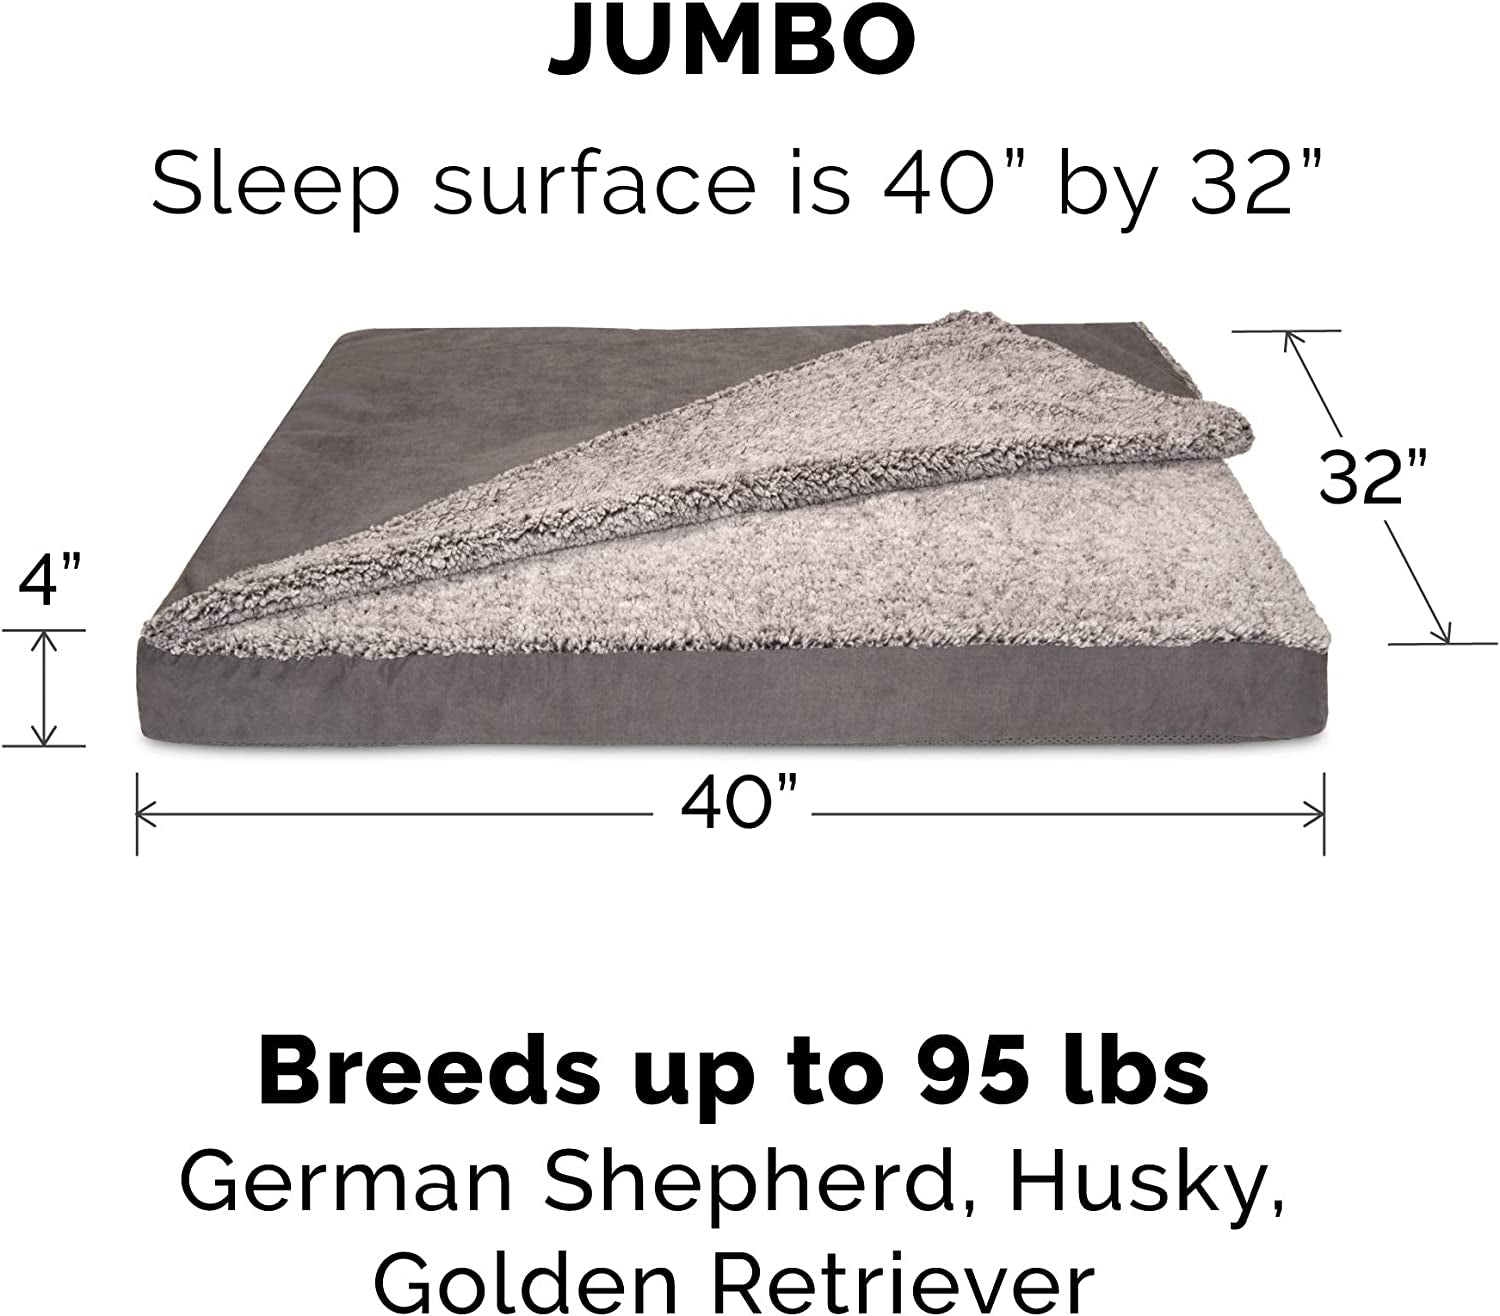 Professional Product Title: "Premium Cooling Gel Dog Bed with Removable Washable Cover - Designed for Large Dogs up to 95 lbs - Berber & Suede Blanket Top Mattress - Gray, Jumbo/XL Size"